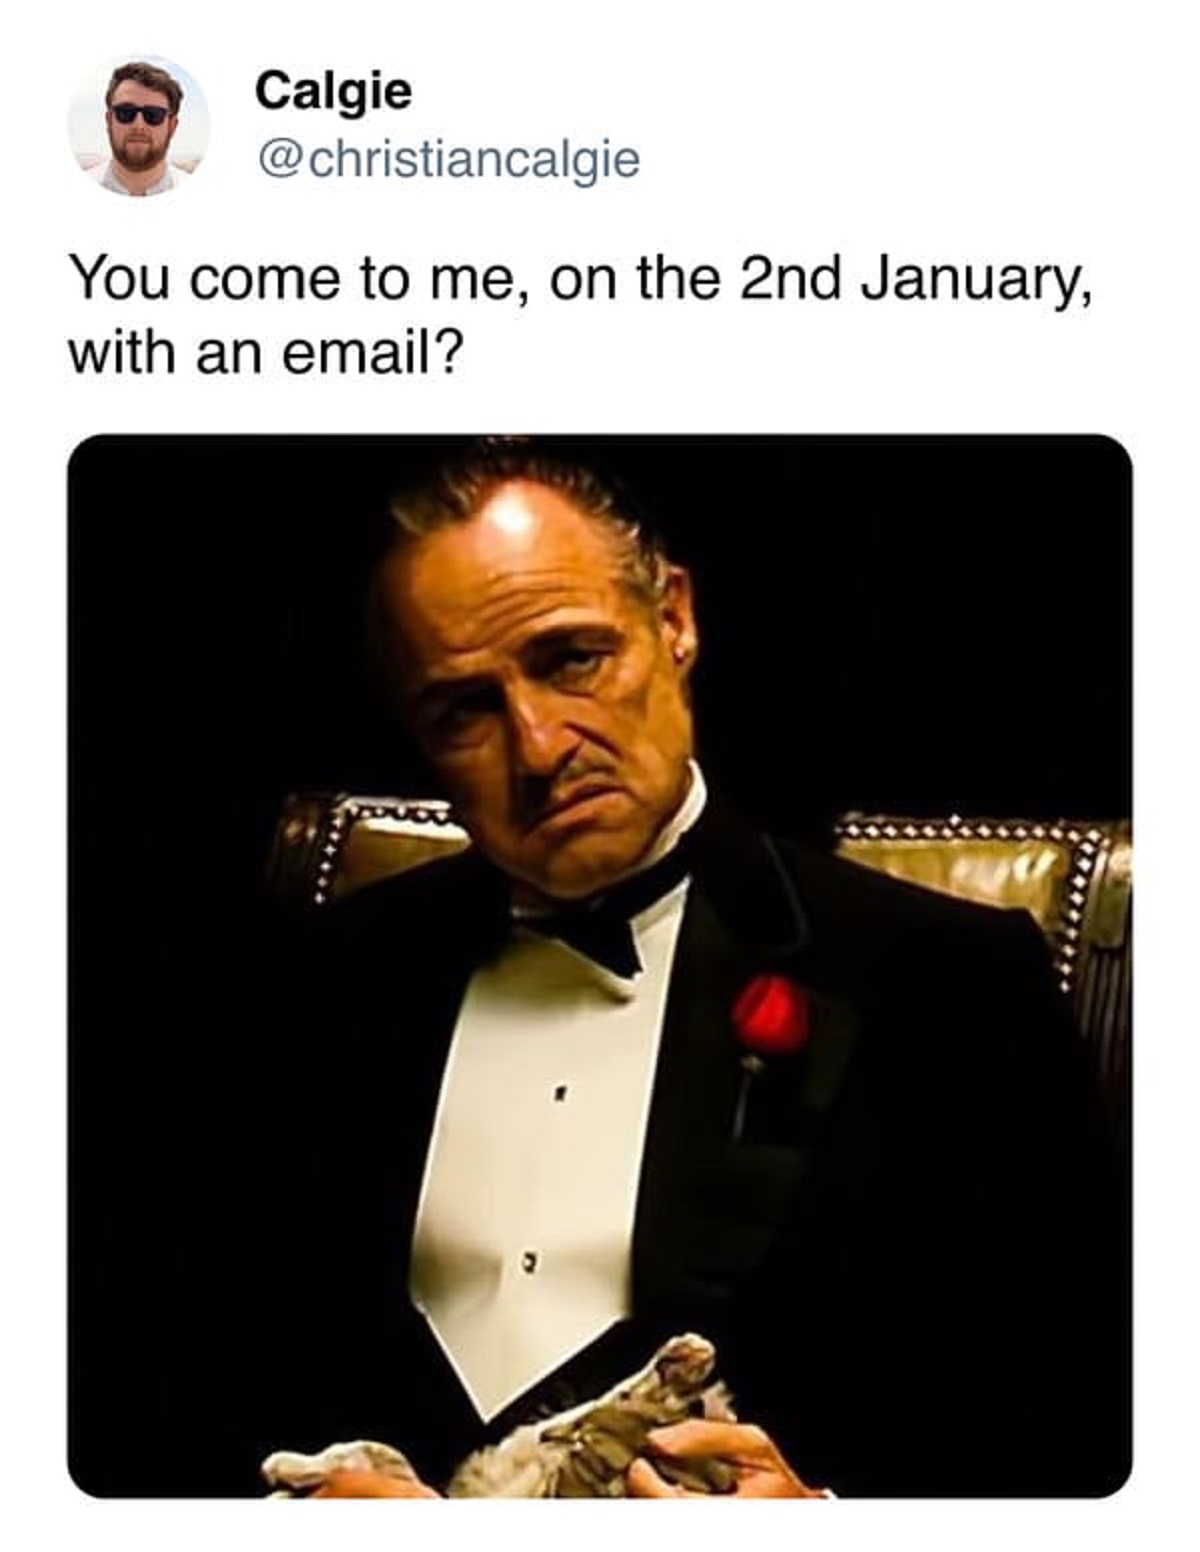 gentleman - Calgie You come to me, on the 2nd January, with an email?